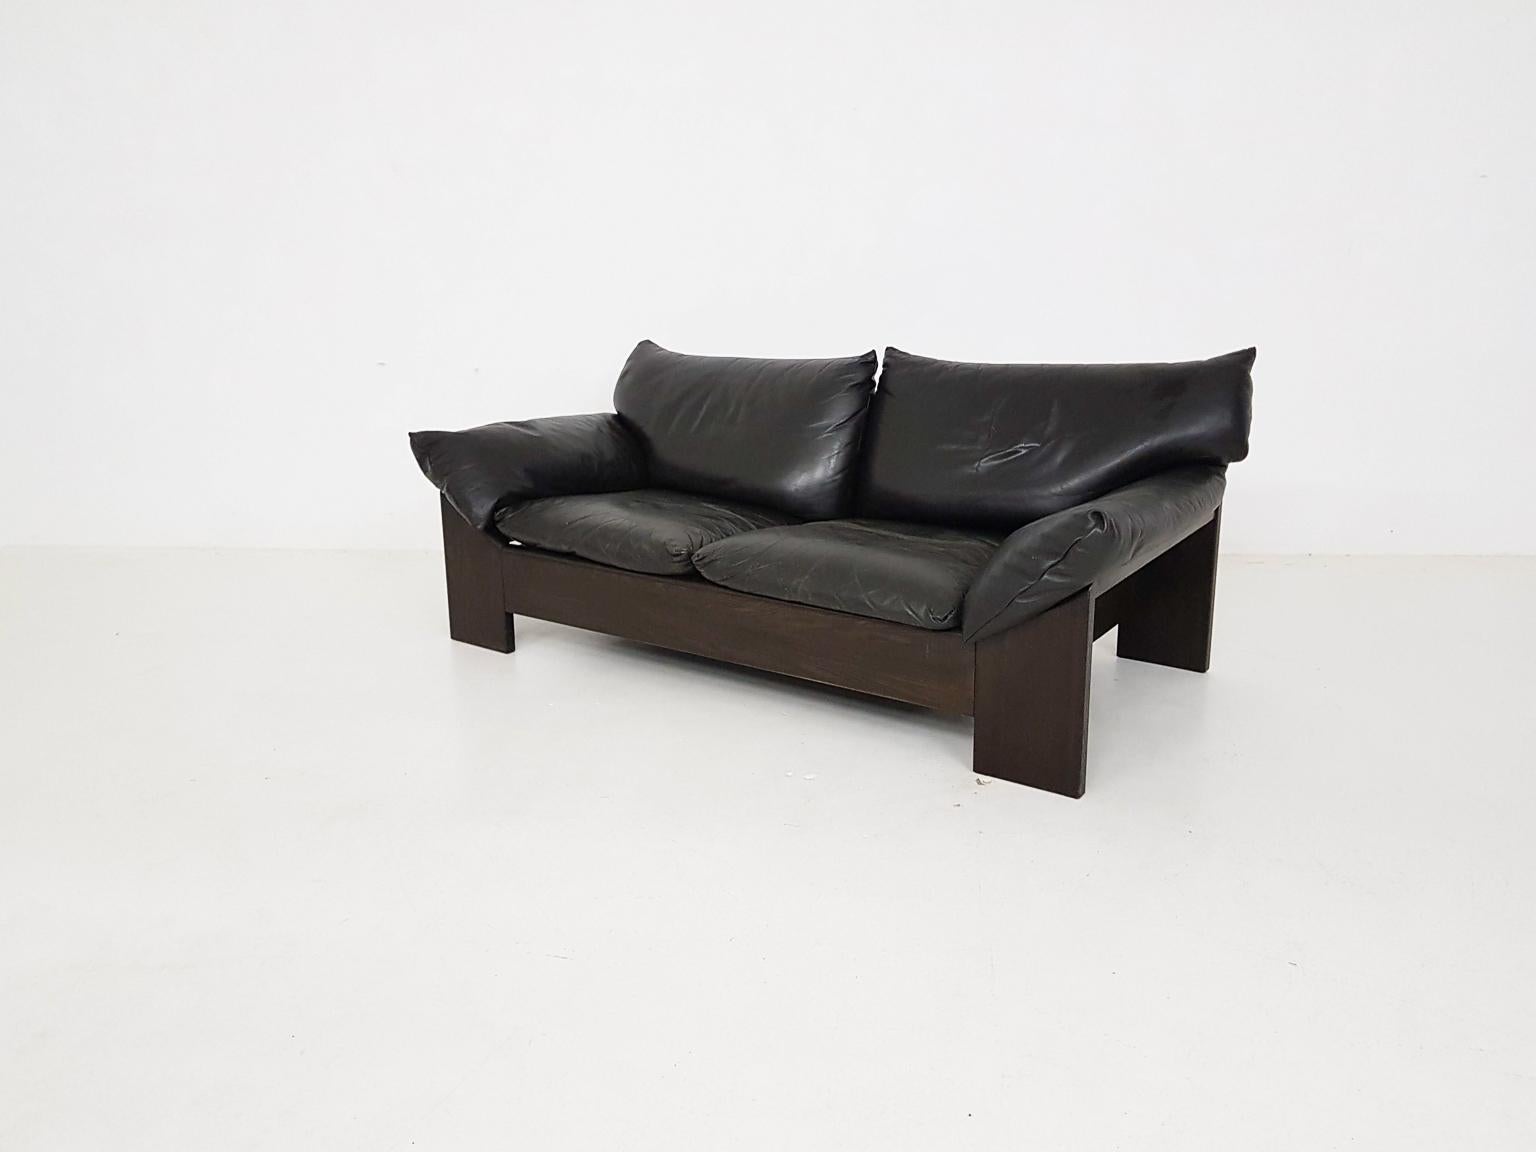 Brutalist high quality sofa or loveseat by Dutch furniture manufacturer Leolux. Made of heavy wood and sturdy leather. Reminds us of sofa's by De Sede and the bz74 sofa and sz73 armchair by Martin Visser. Would match perfectly with natural stone